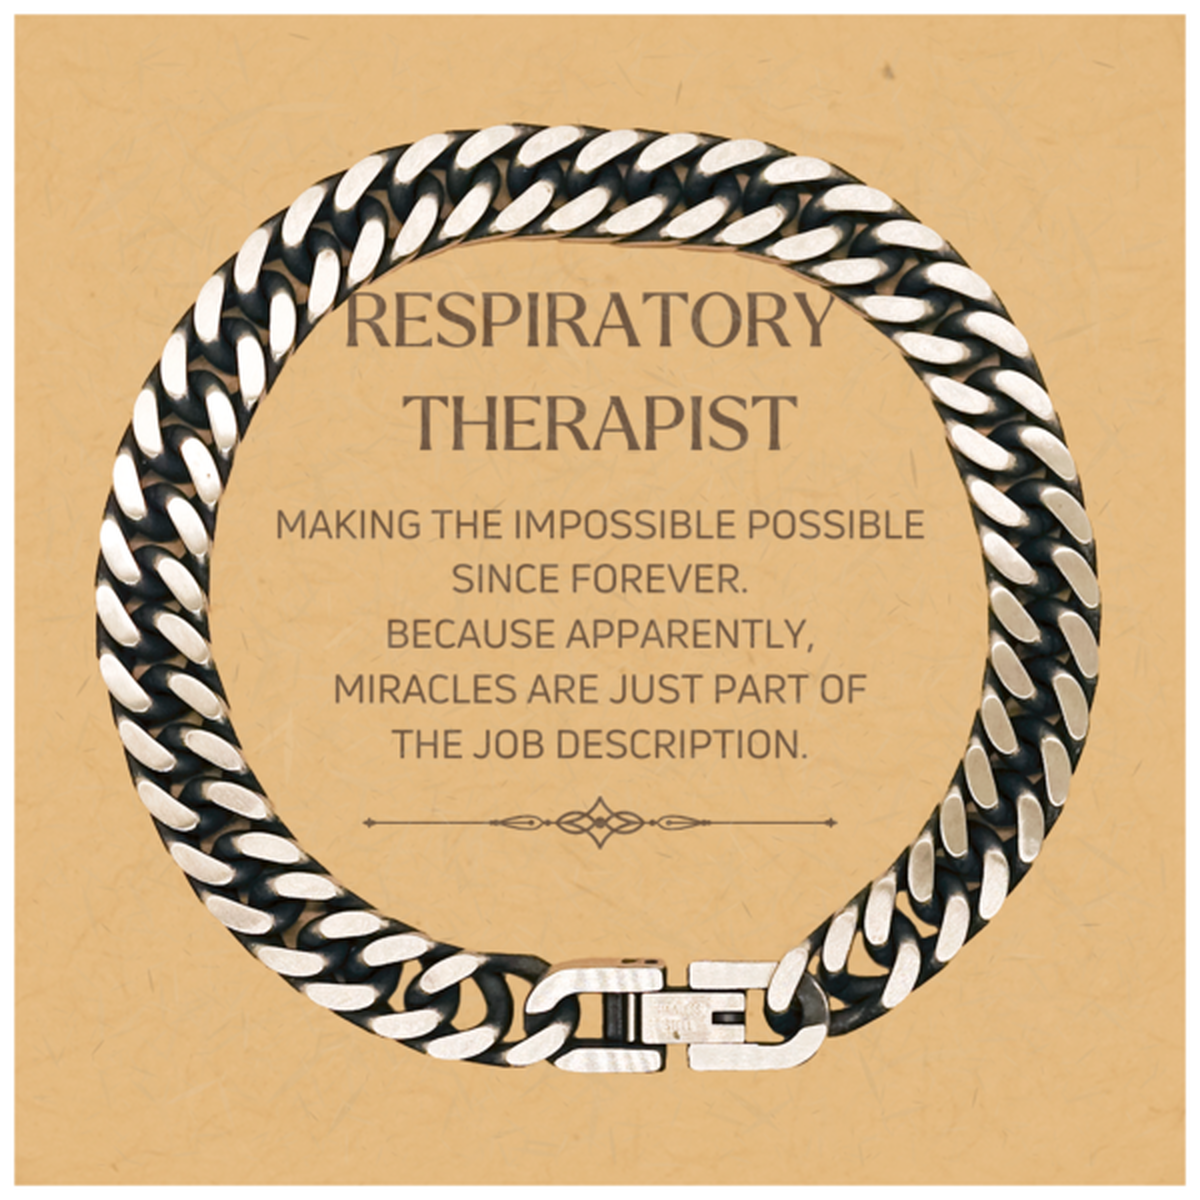 Funny Respiratory Therapist Gifts, Miracles are just part of the job description, Inspirational Birthday Christmas Cuban Link Chain Bracelet For Respiratory Therapist, Men, Women, Coworkers, Friends, Boss